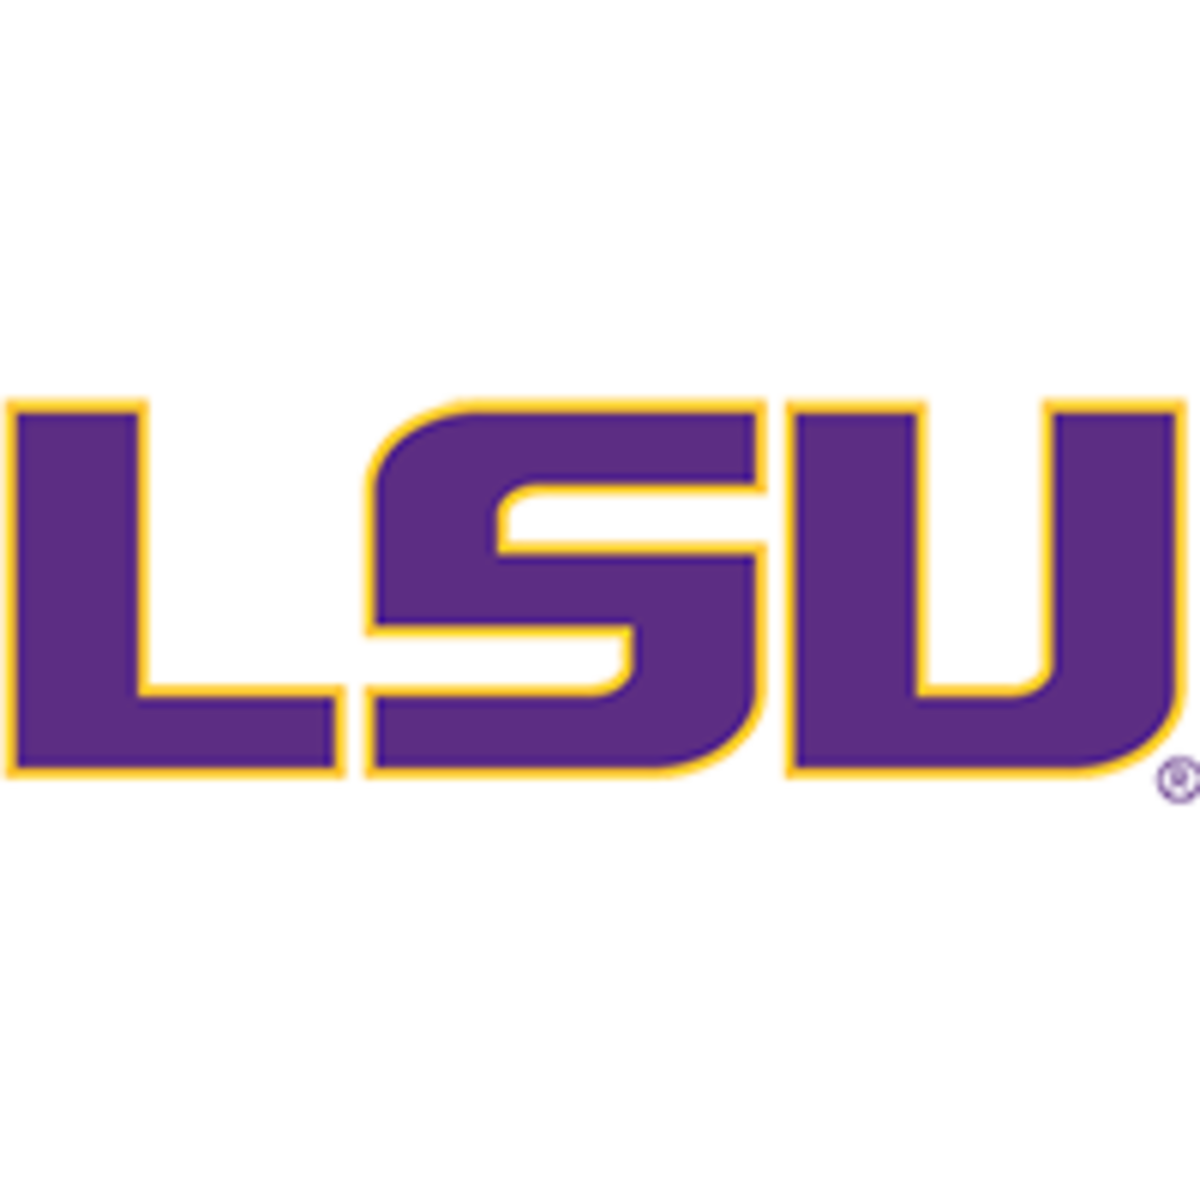 Lsu Spring Schedule 2022 Lsu Football Schedule 2022 - Athlonsports.com | Expert Predictions, Picks,  And Previews